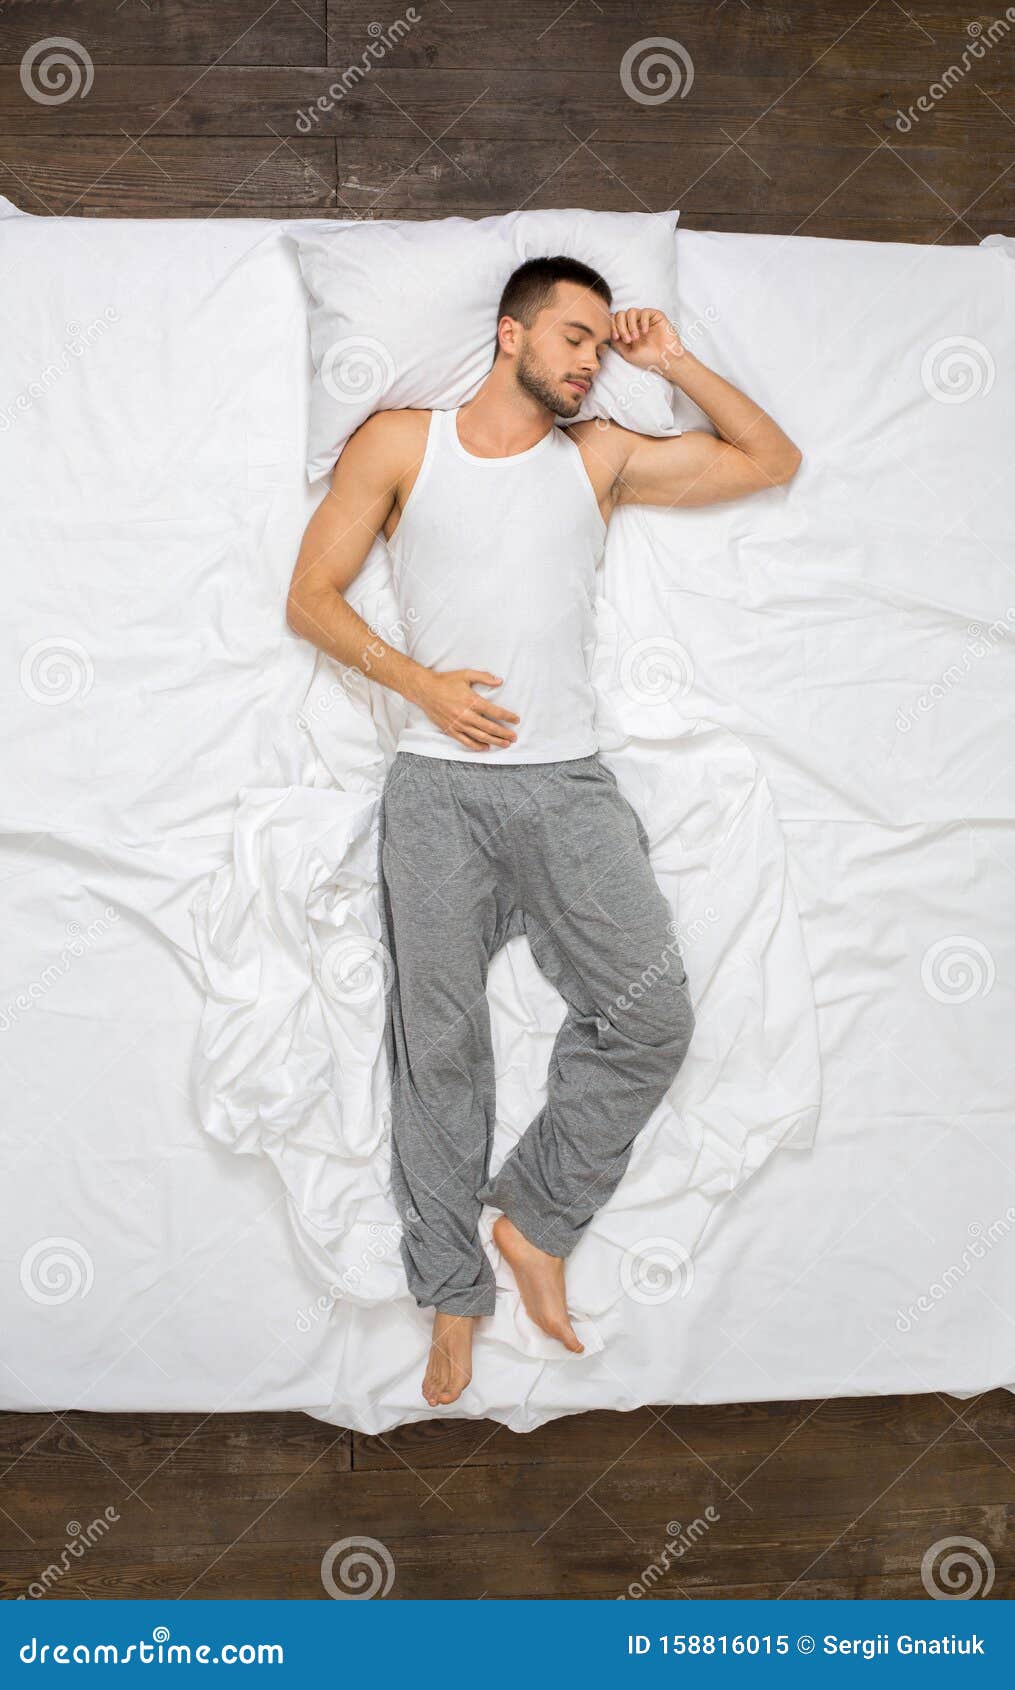 Young Man Relaxation on the Bed Top View Sleeping Stock Image - Image ...